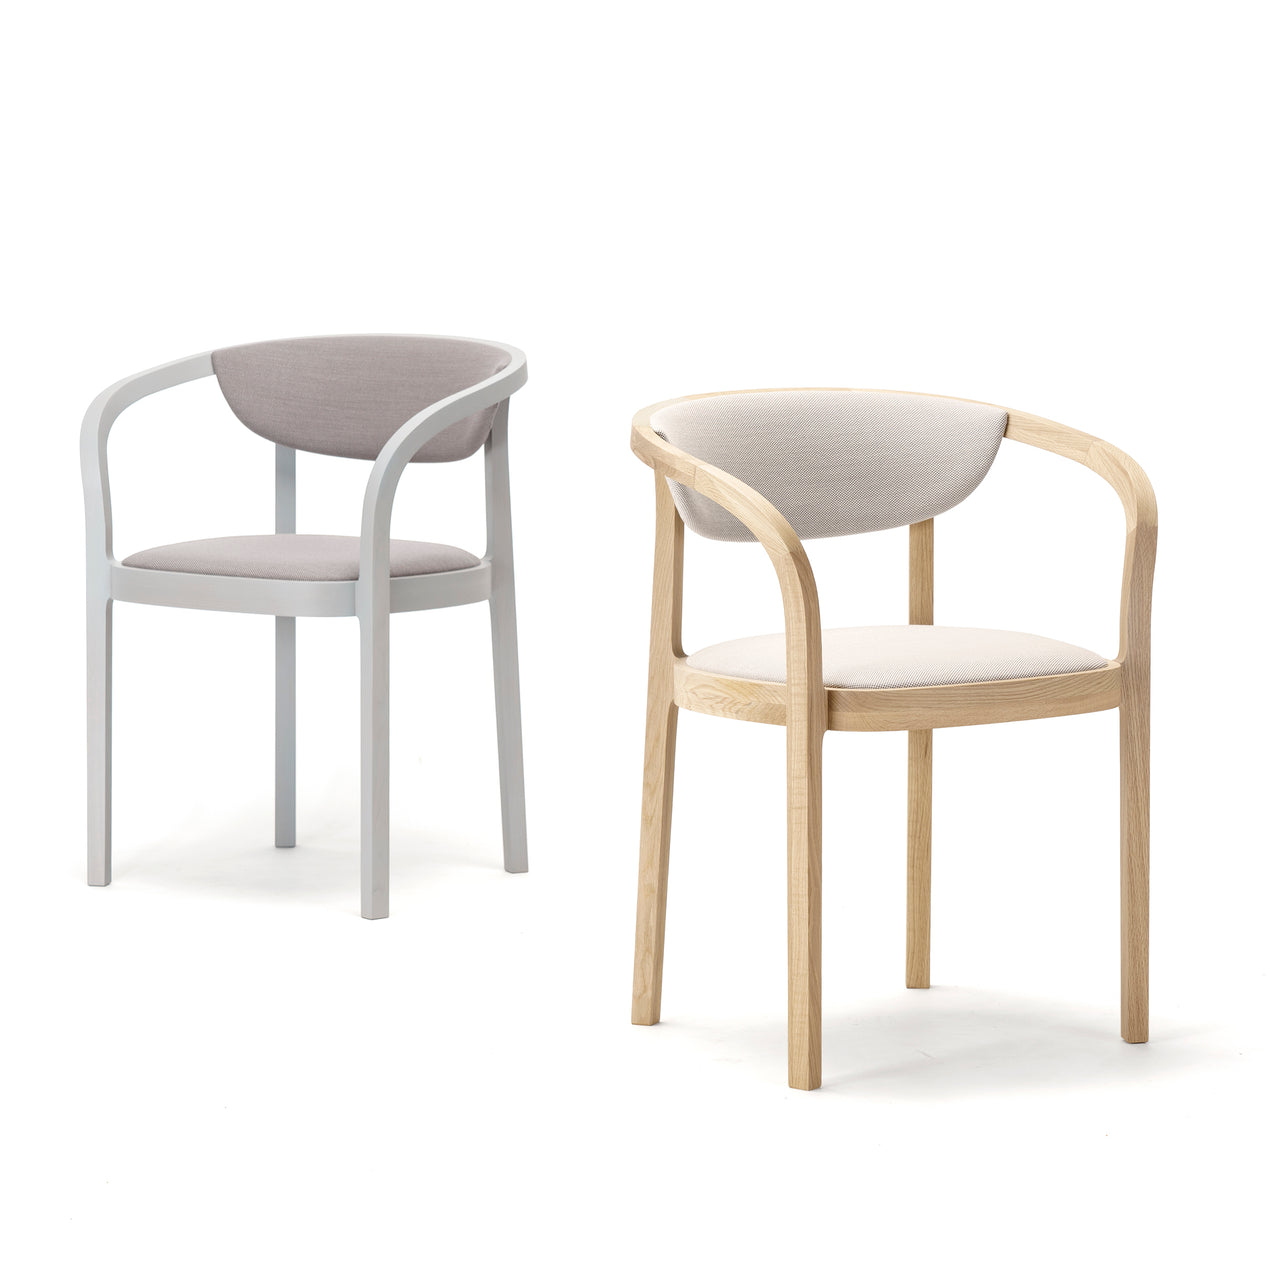 Chesa Chair with Pad | Buy Karimoku New Standard online at A+R